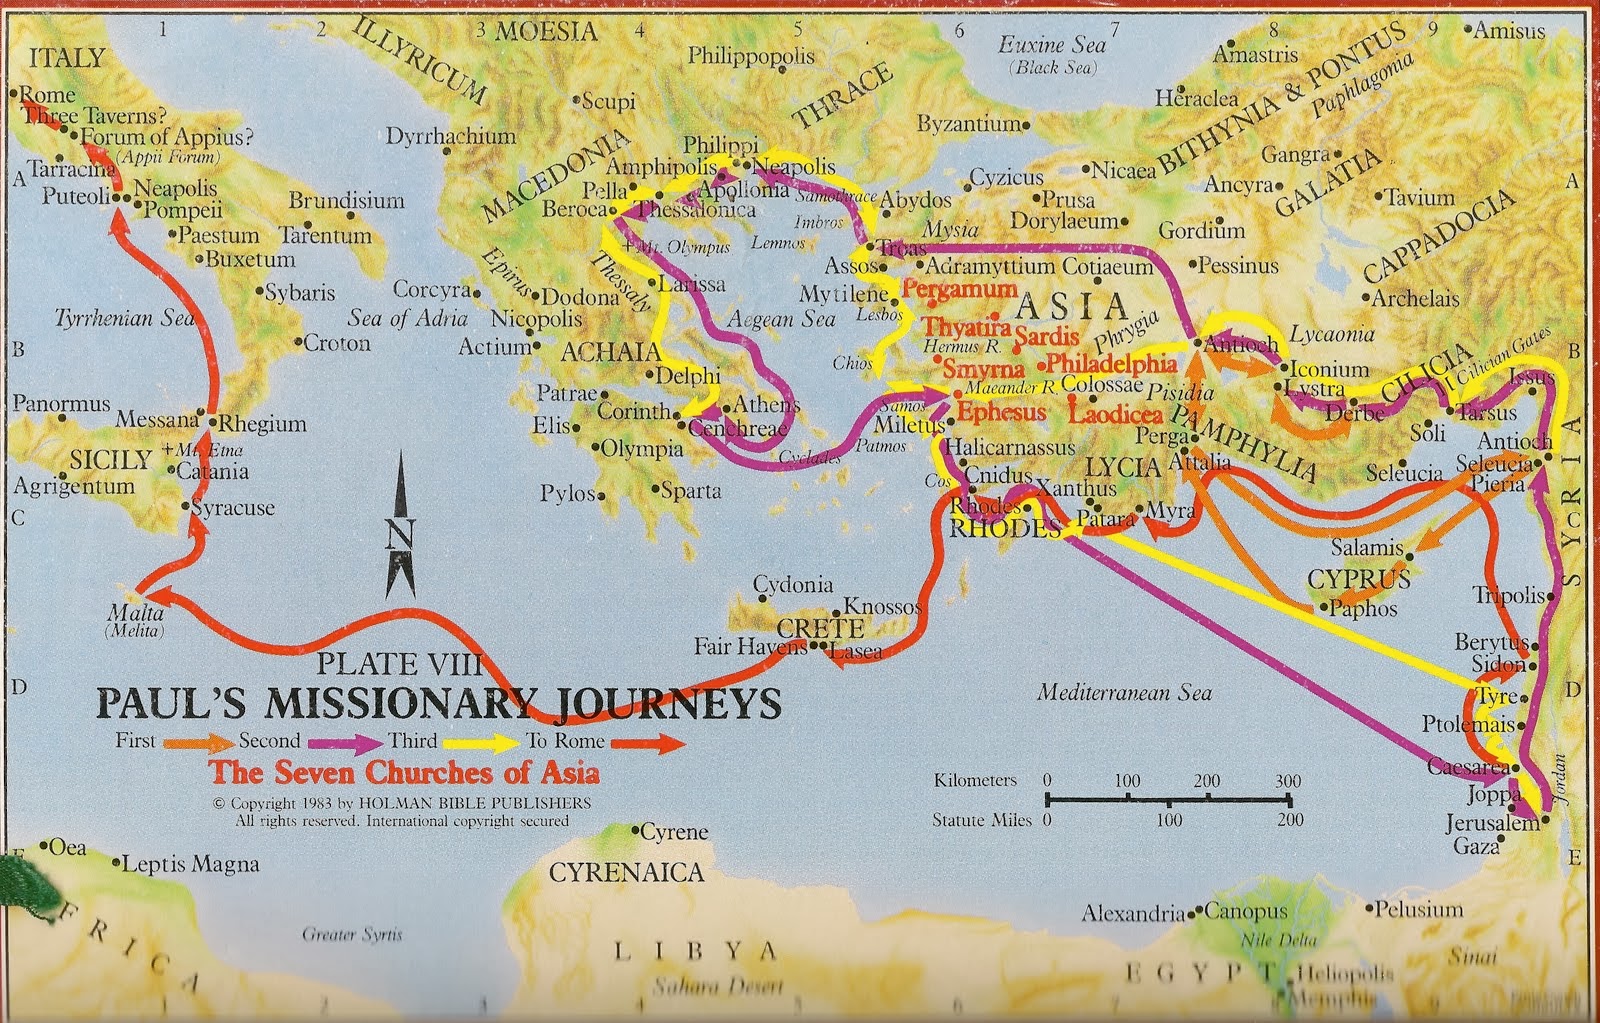 the jerusalem conference took place between pauls second and third missionary journeys